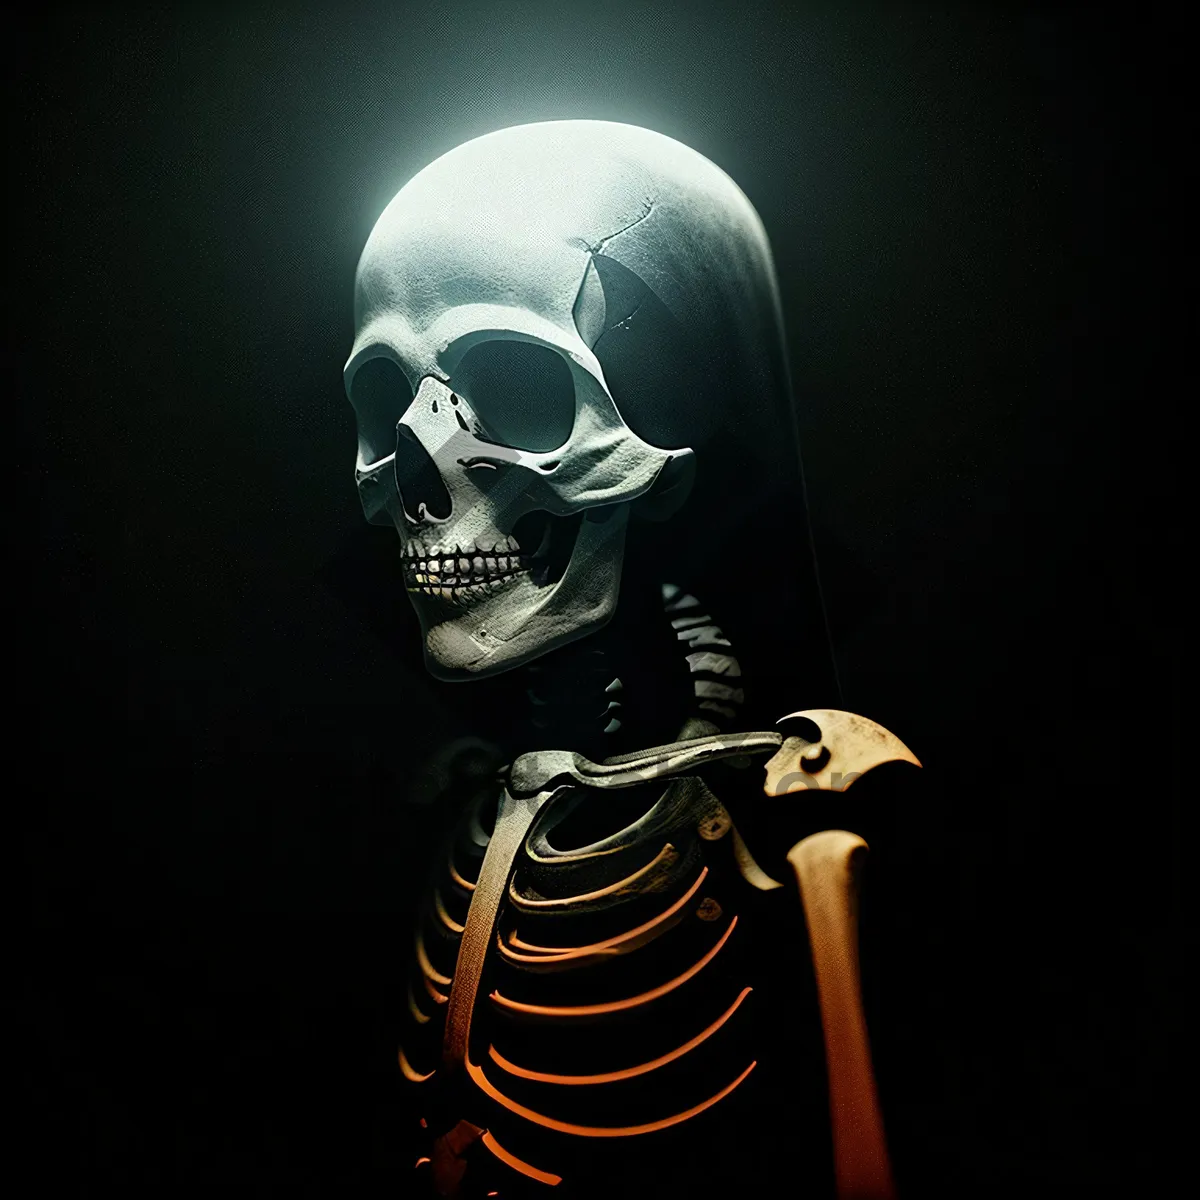 Picture of Terrifying anatomical skull sculpture evokes spine-chilling fear.